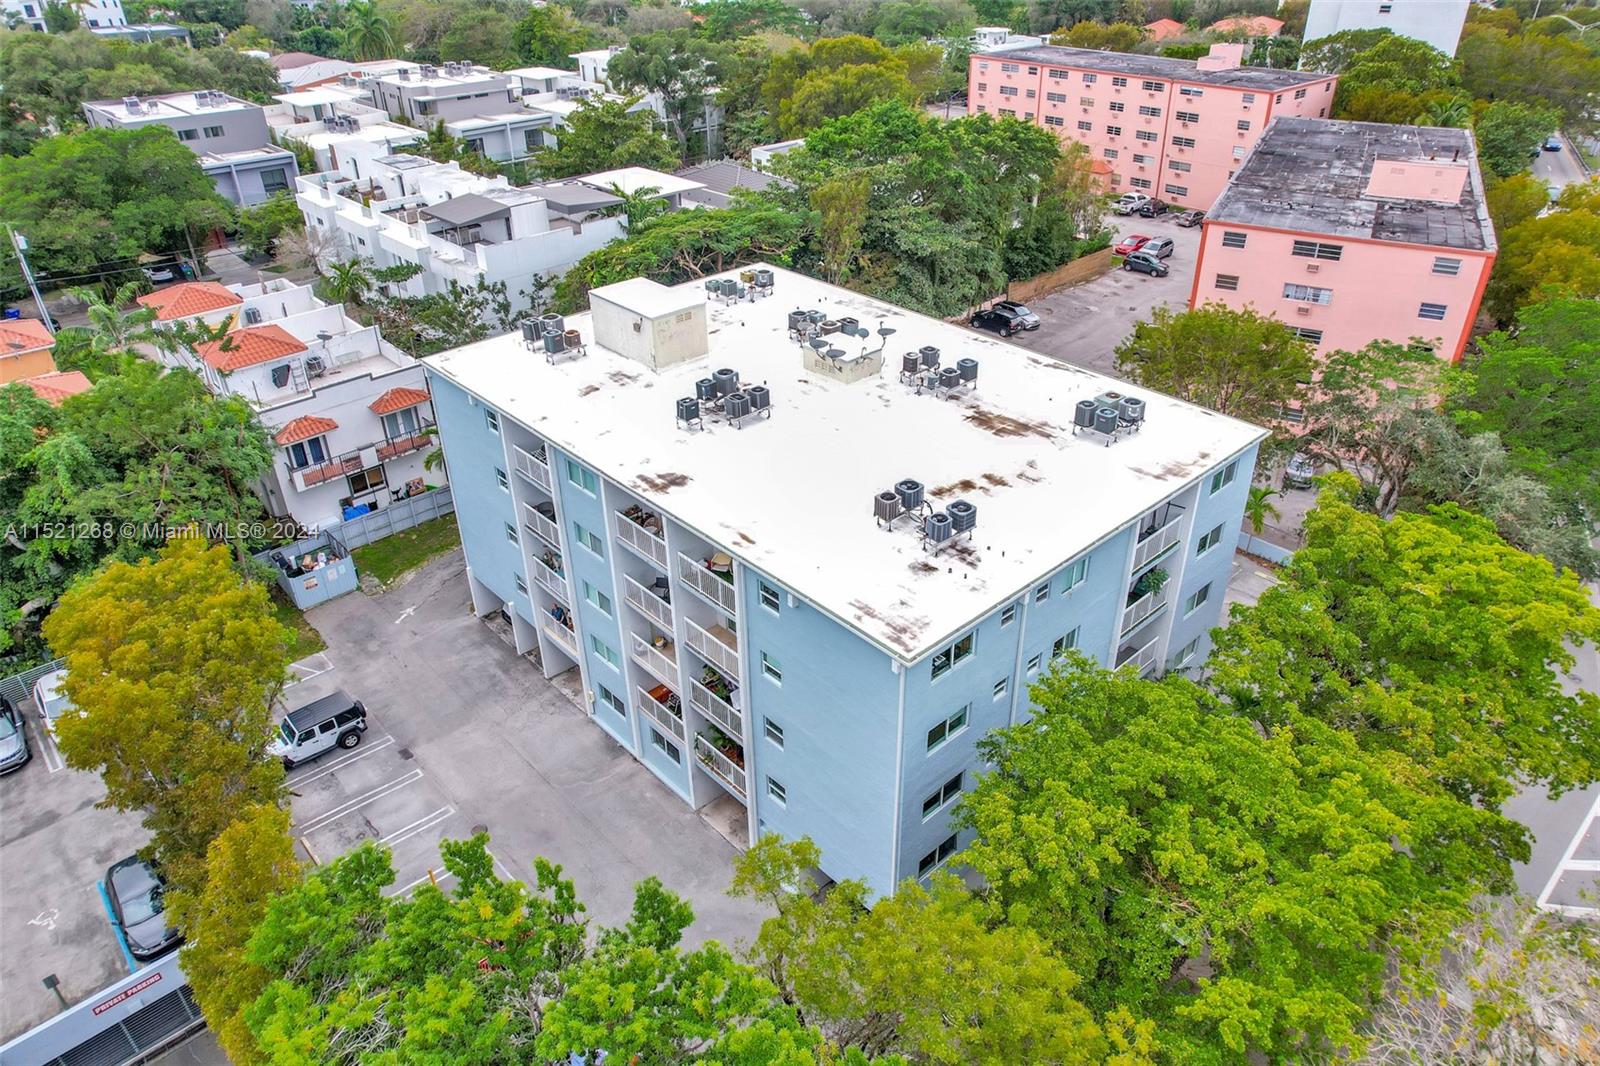 Enjoy comfortable living in this well-maintained condo in Coconut Grove, Miami. With a modern design, the condo offers a practical layout, a functional kitchen, 2 bed 1 bath, and a spacious balcony and living areas. Laundry facilities located in the building, gated entry, assigned parking directly under the unit in covered garage, and elevator.  Enjoy convenient access to Coconut Grove, downtown Miami, highways and more. Walking distance to train station. Your ideal Miami condo is ready for you!